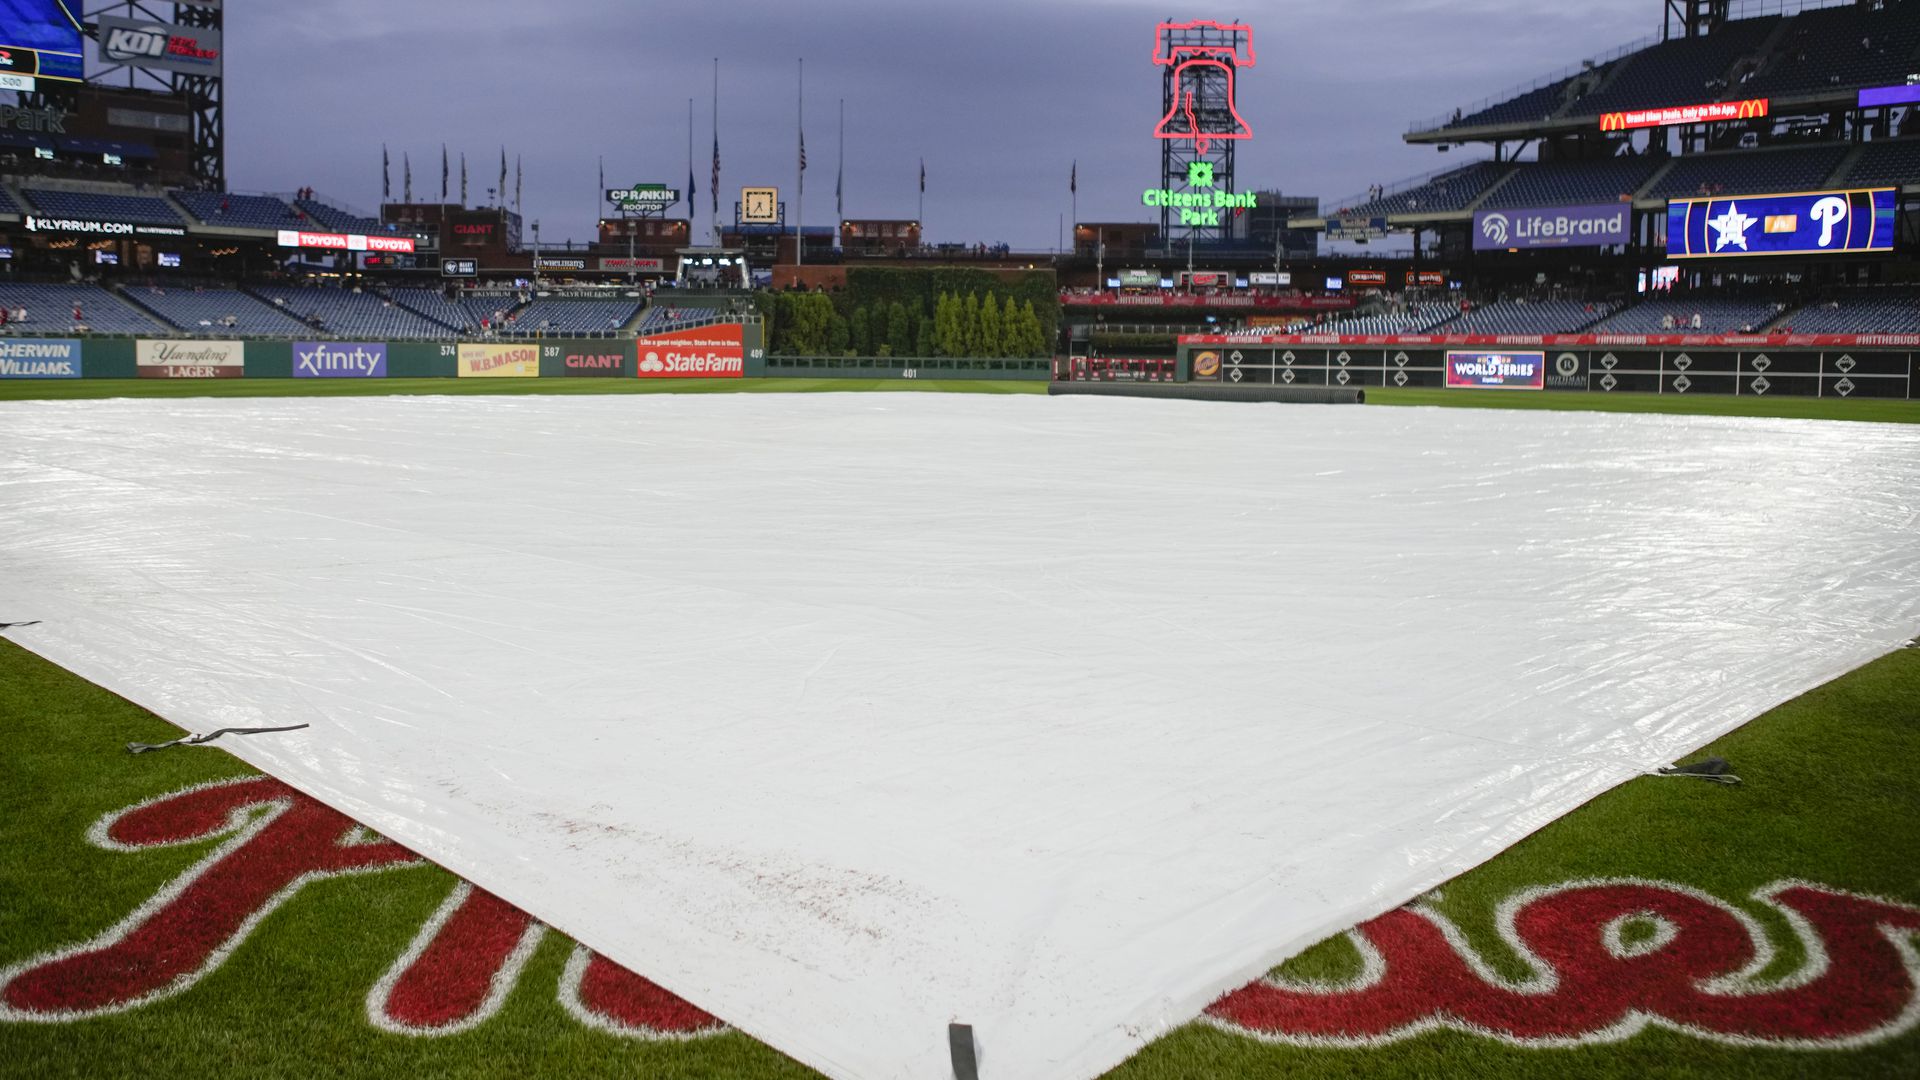 braves, phillies opening day matchup postponed until friday